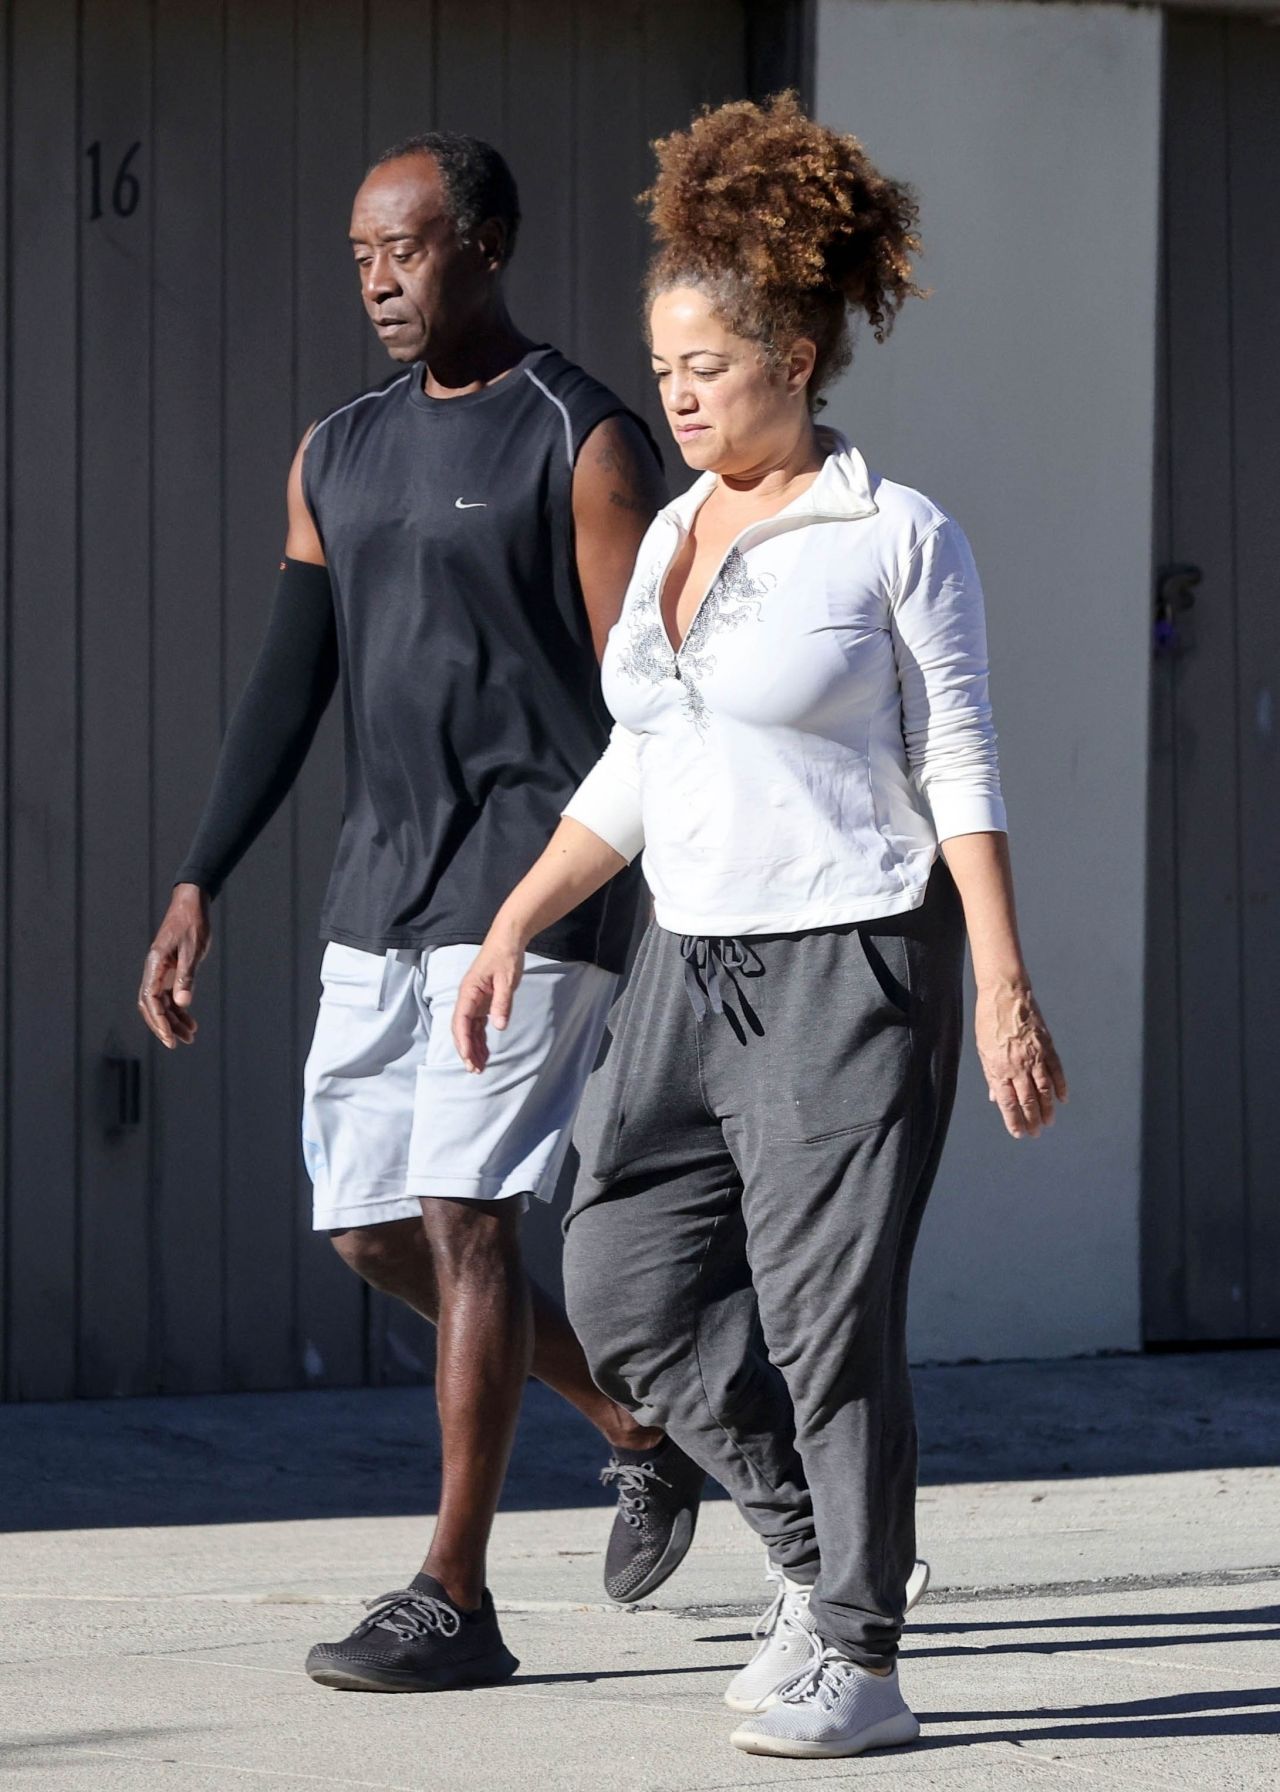 Bridgid Coulter and Don Cheadle Workout Dress in Los Angeles